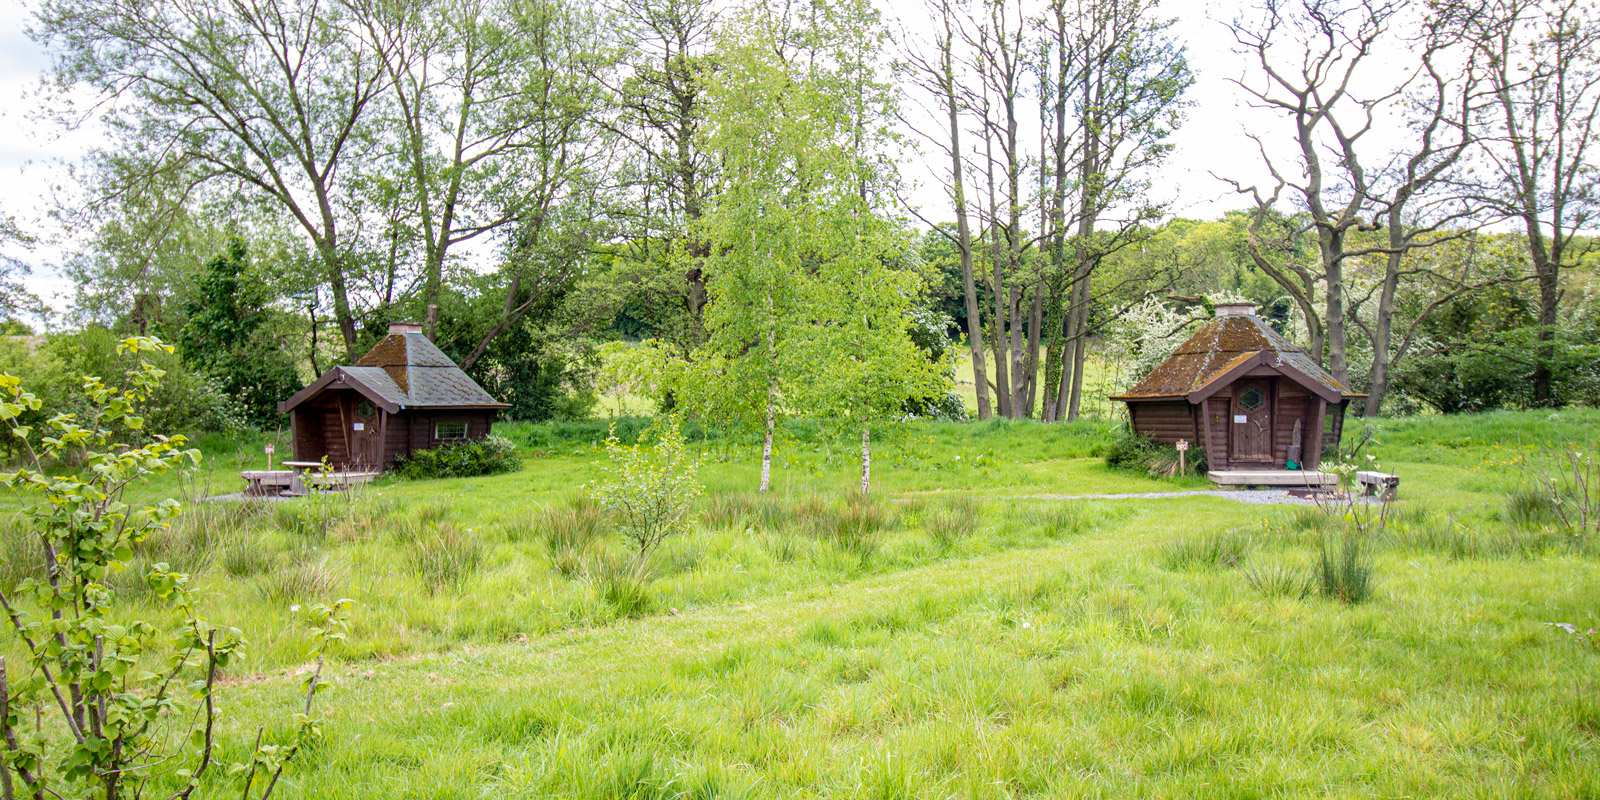 Glamping eco pods for eco pod holiday and glamping pods holidays in Yorkshire. 